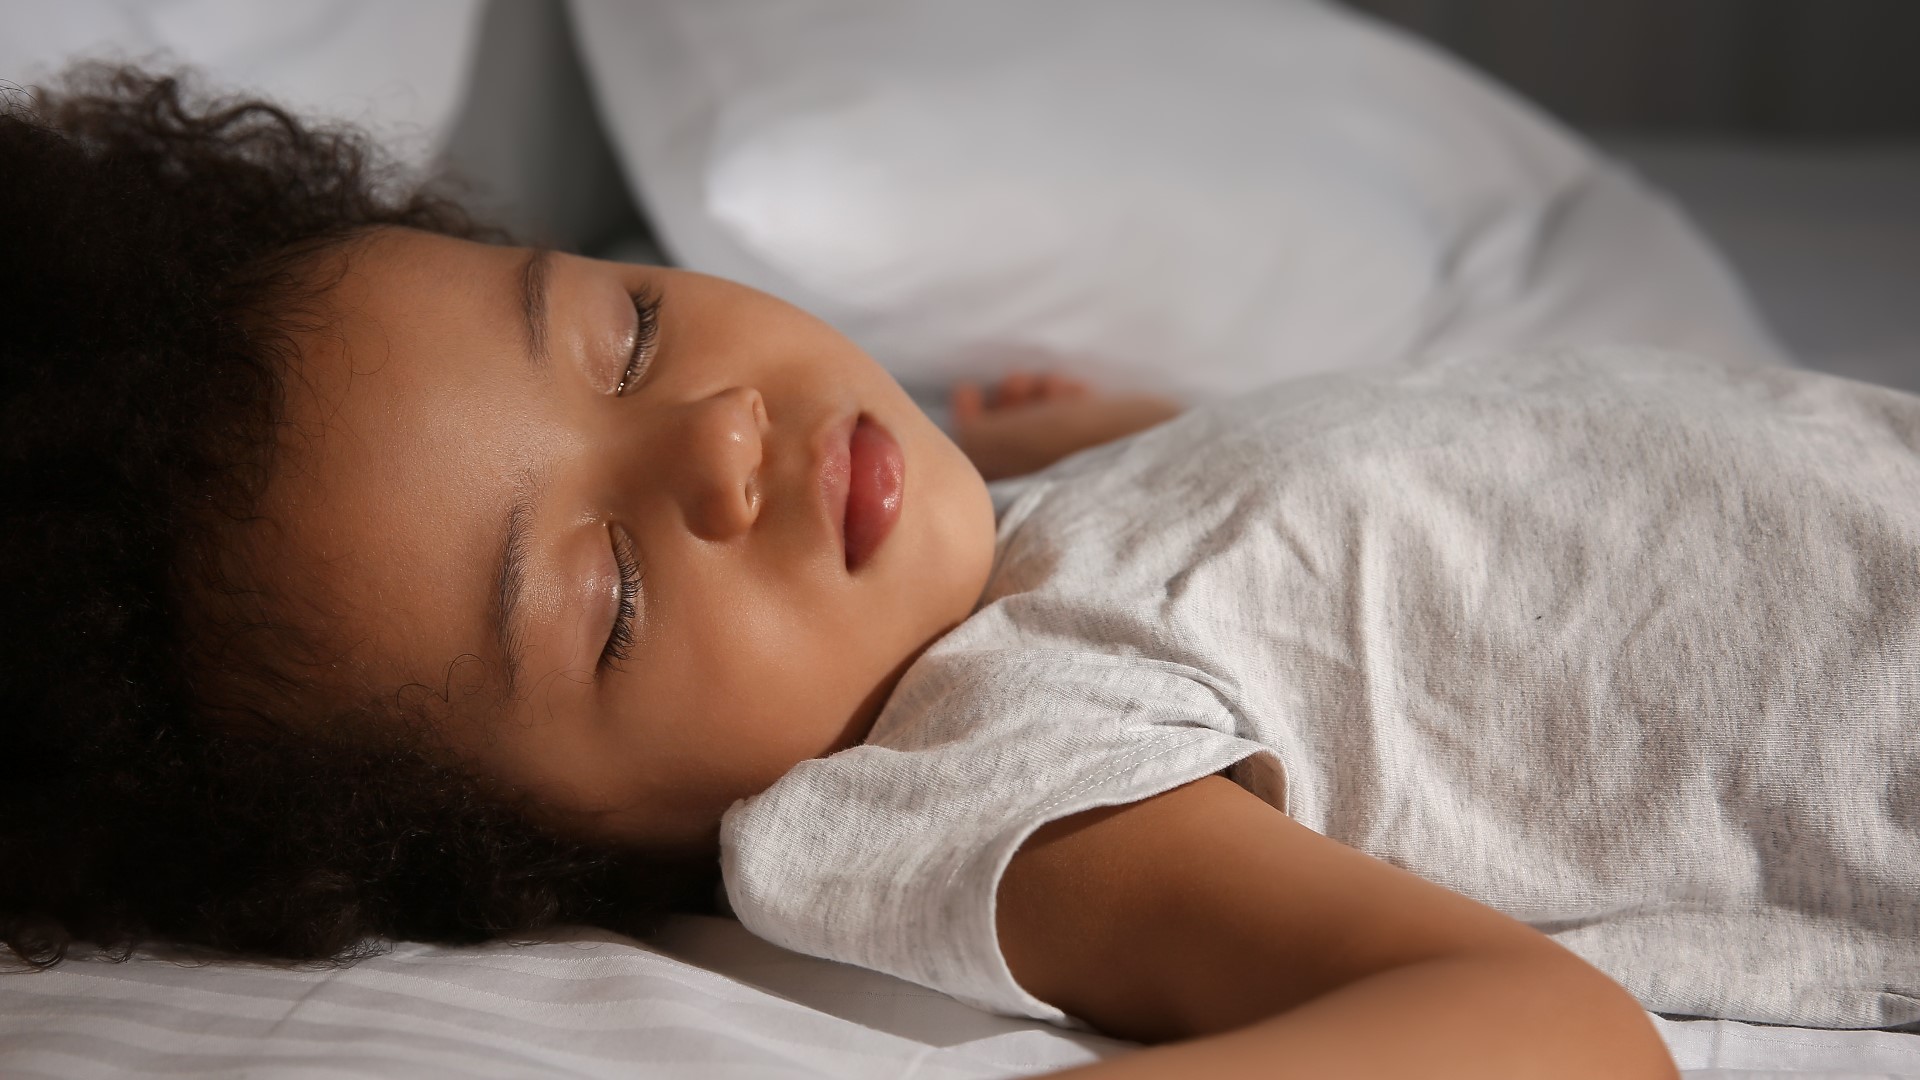 A new study surrounding the effects of mild sleep deprivation in kids reports those who slept less than 40 minutes a night, showed a decrease in their well-being.